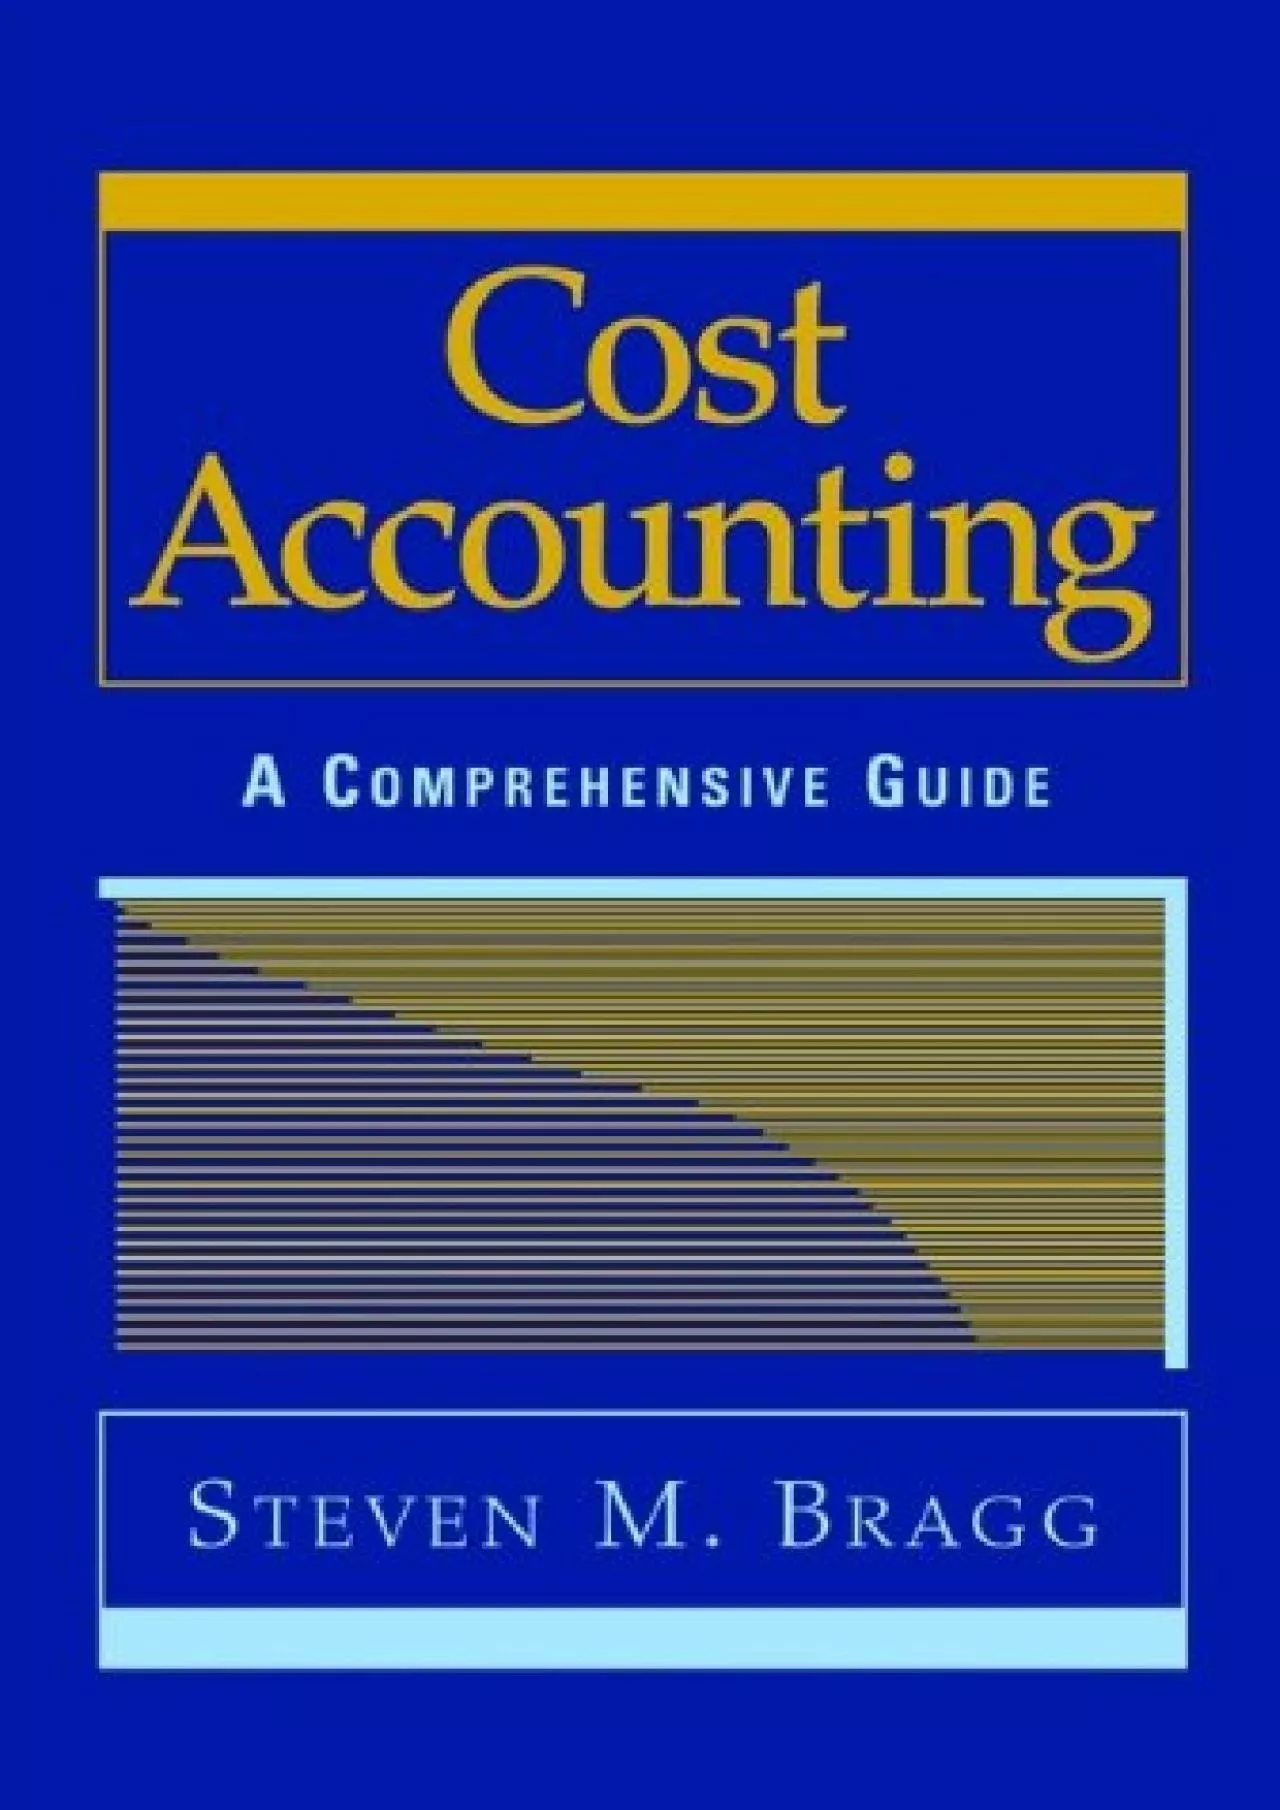 Cost Analysis Of Electronic SCost Accounting: A Comprehensive Guideystems (Second Edition)